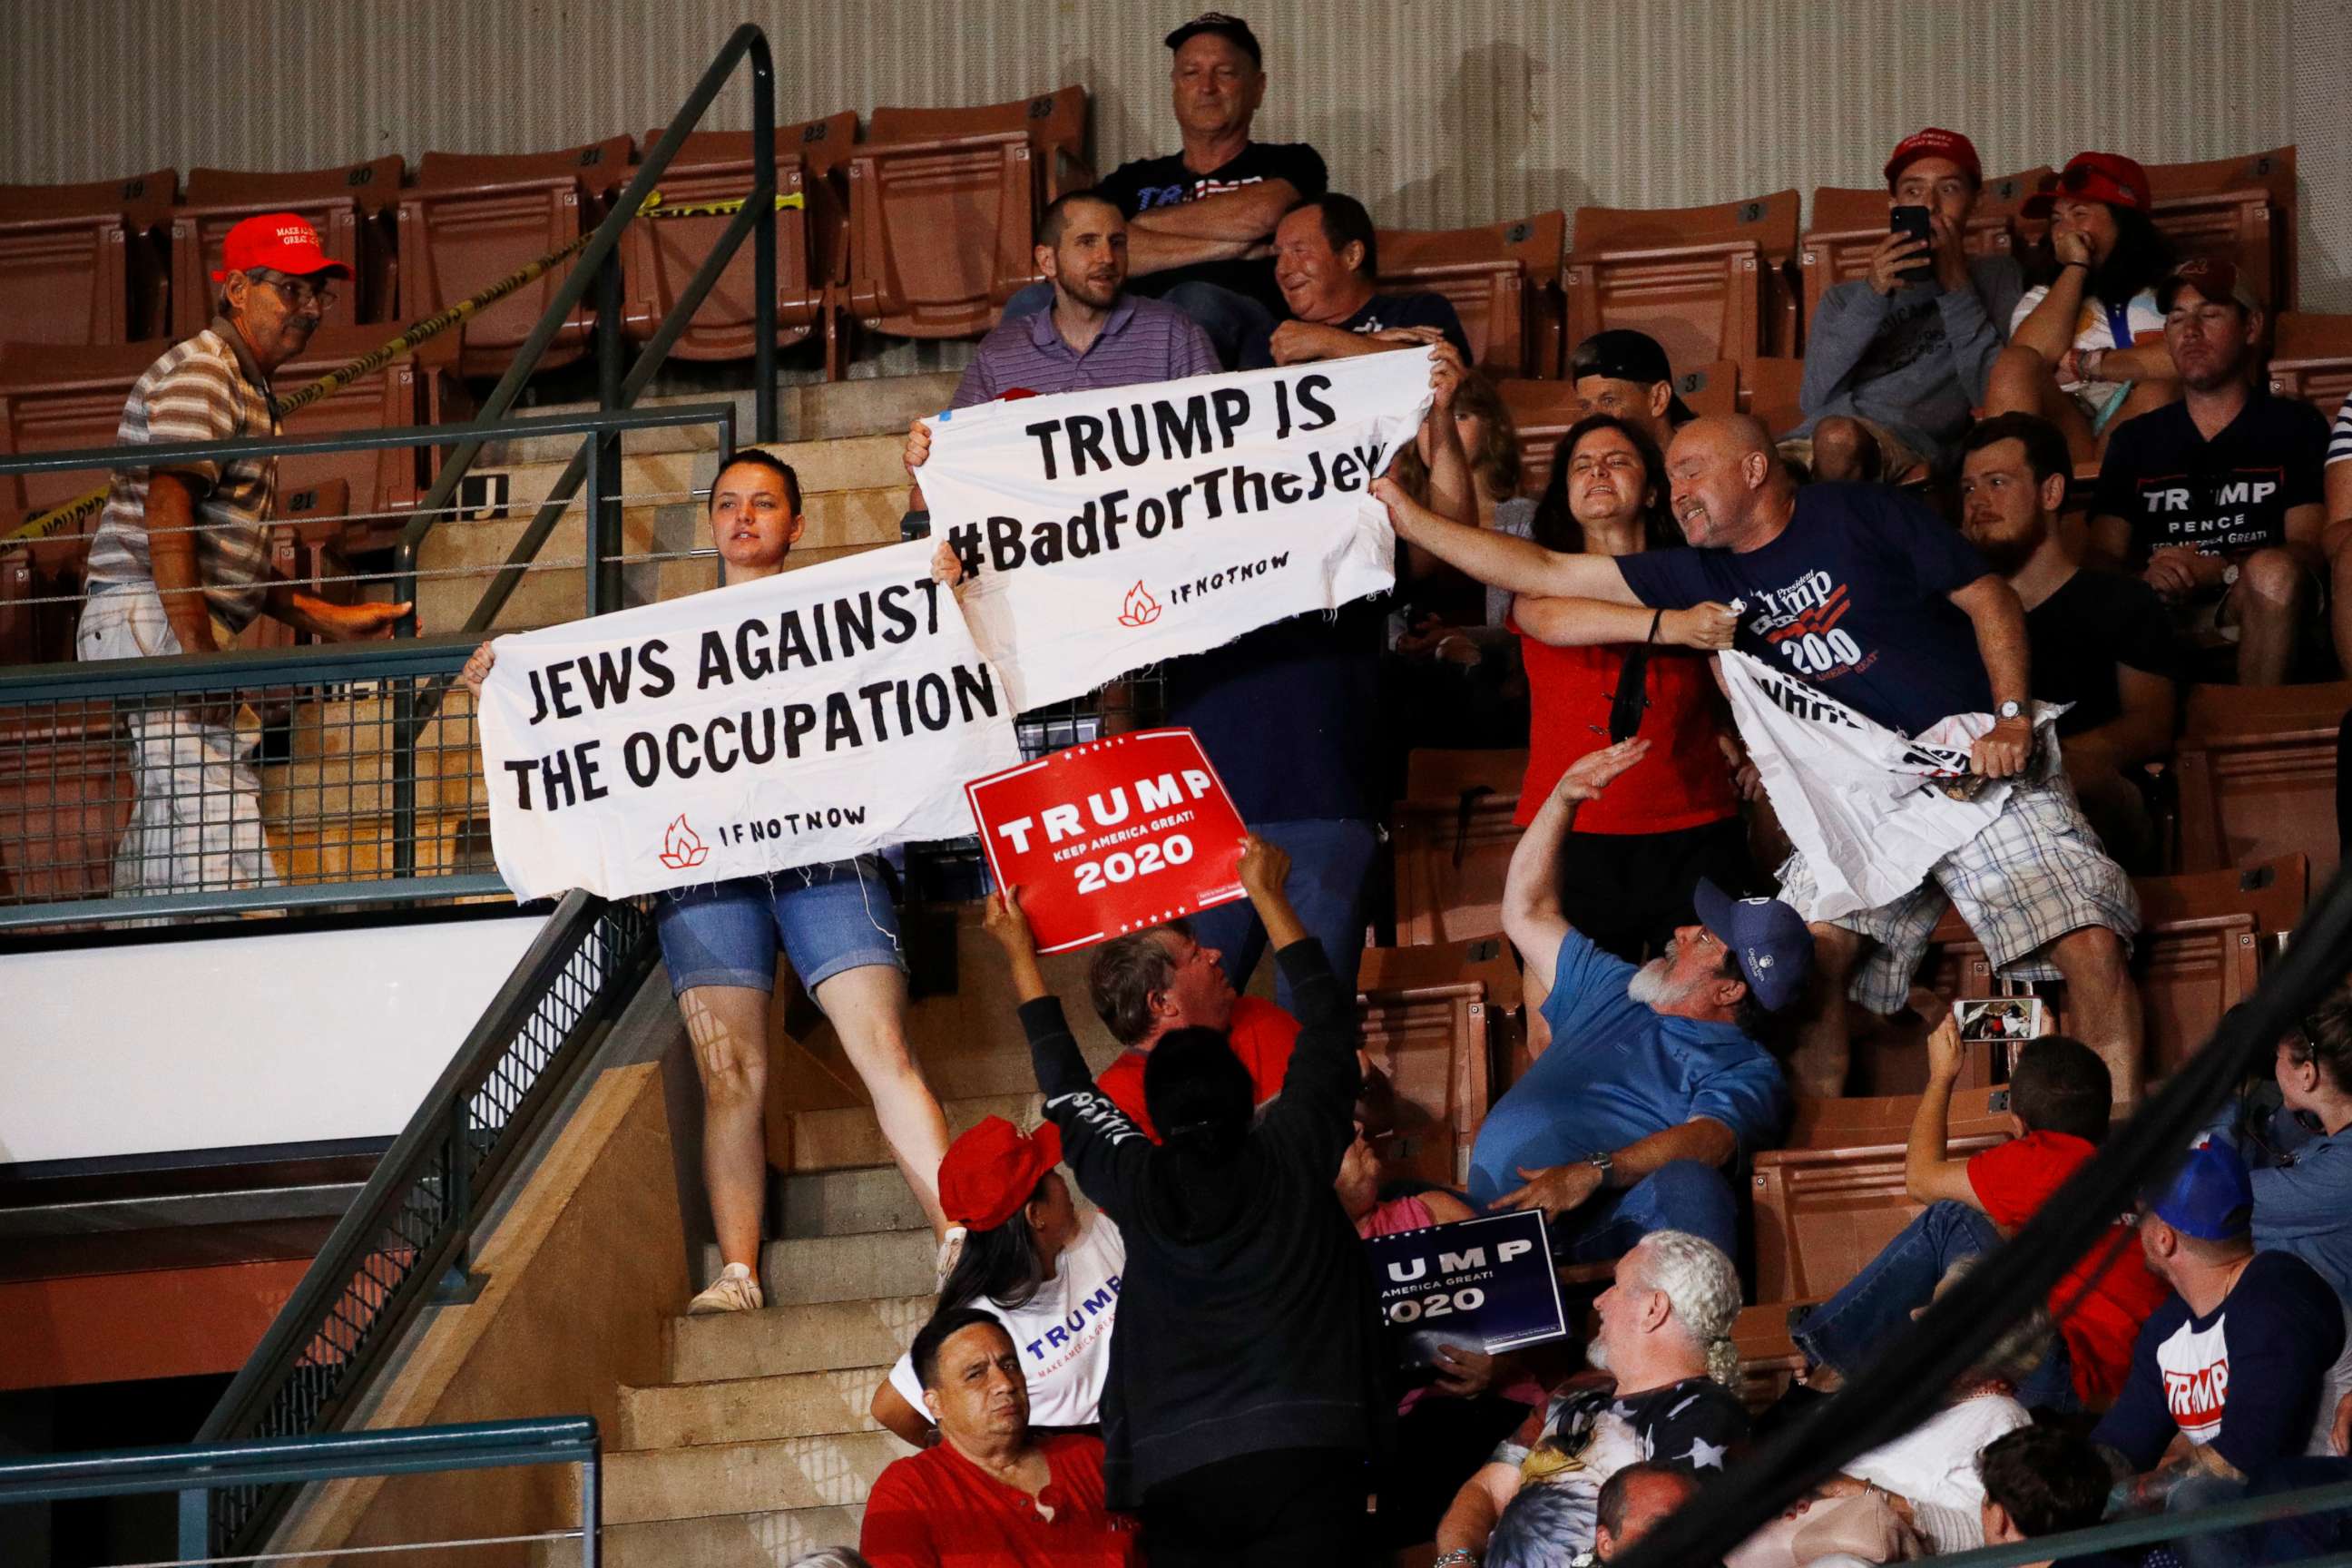 PHOTO: A Trump supporter, right, tries to grab a protesters' sign as President Donald Trump speaks at a campaign rally, Thursday, Aug. 15, 2019, in Manchester, N.H.